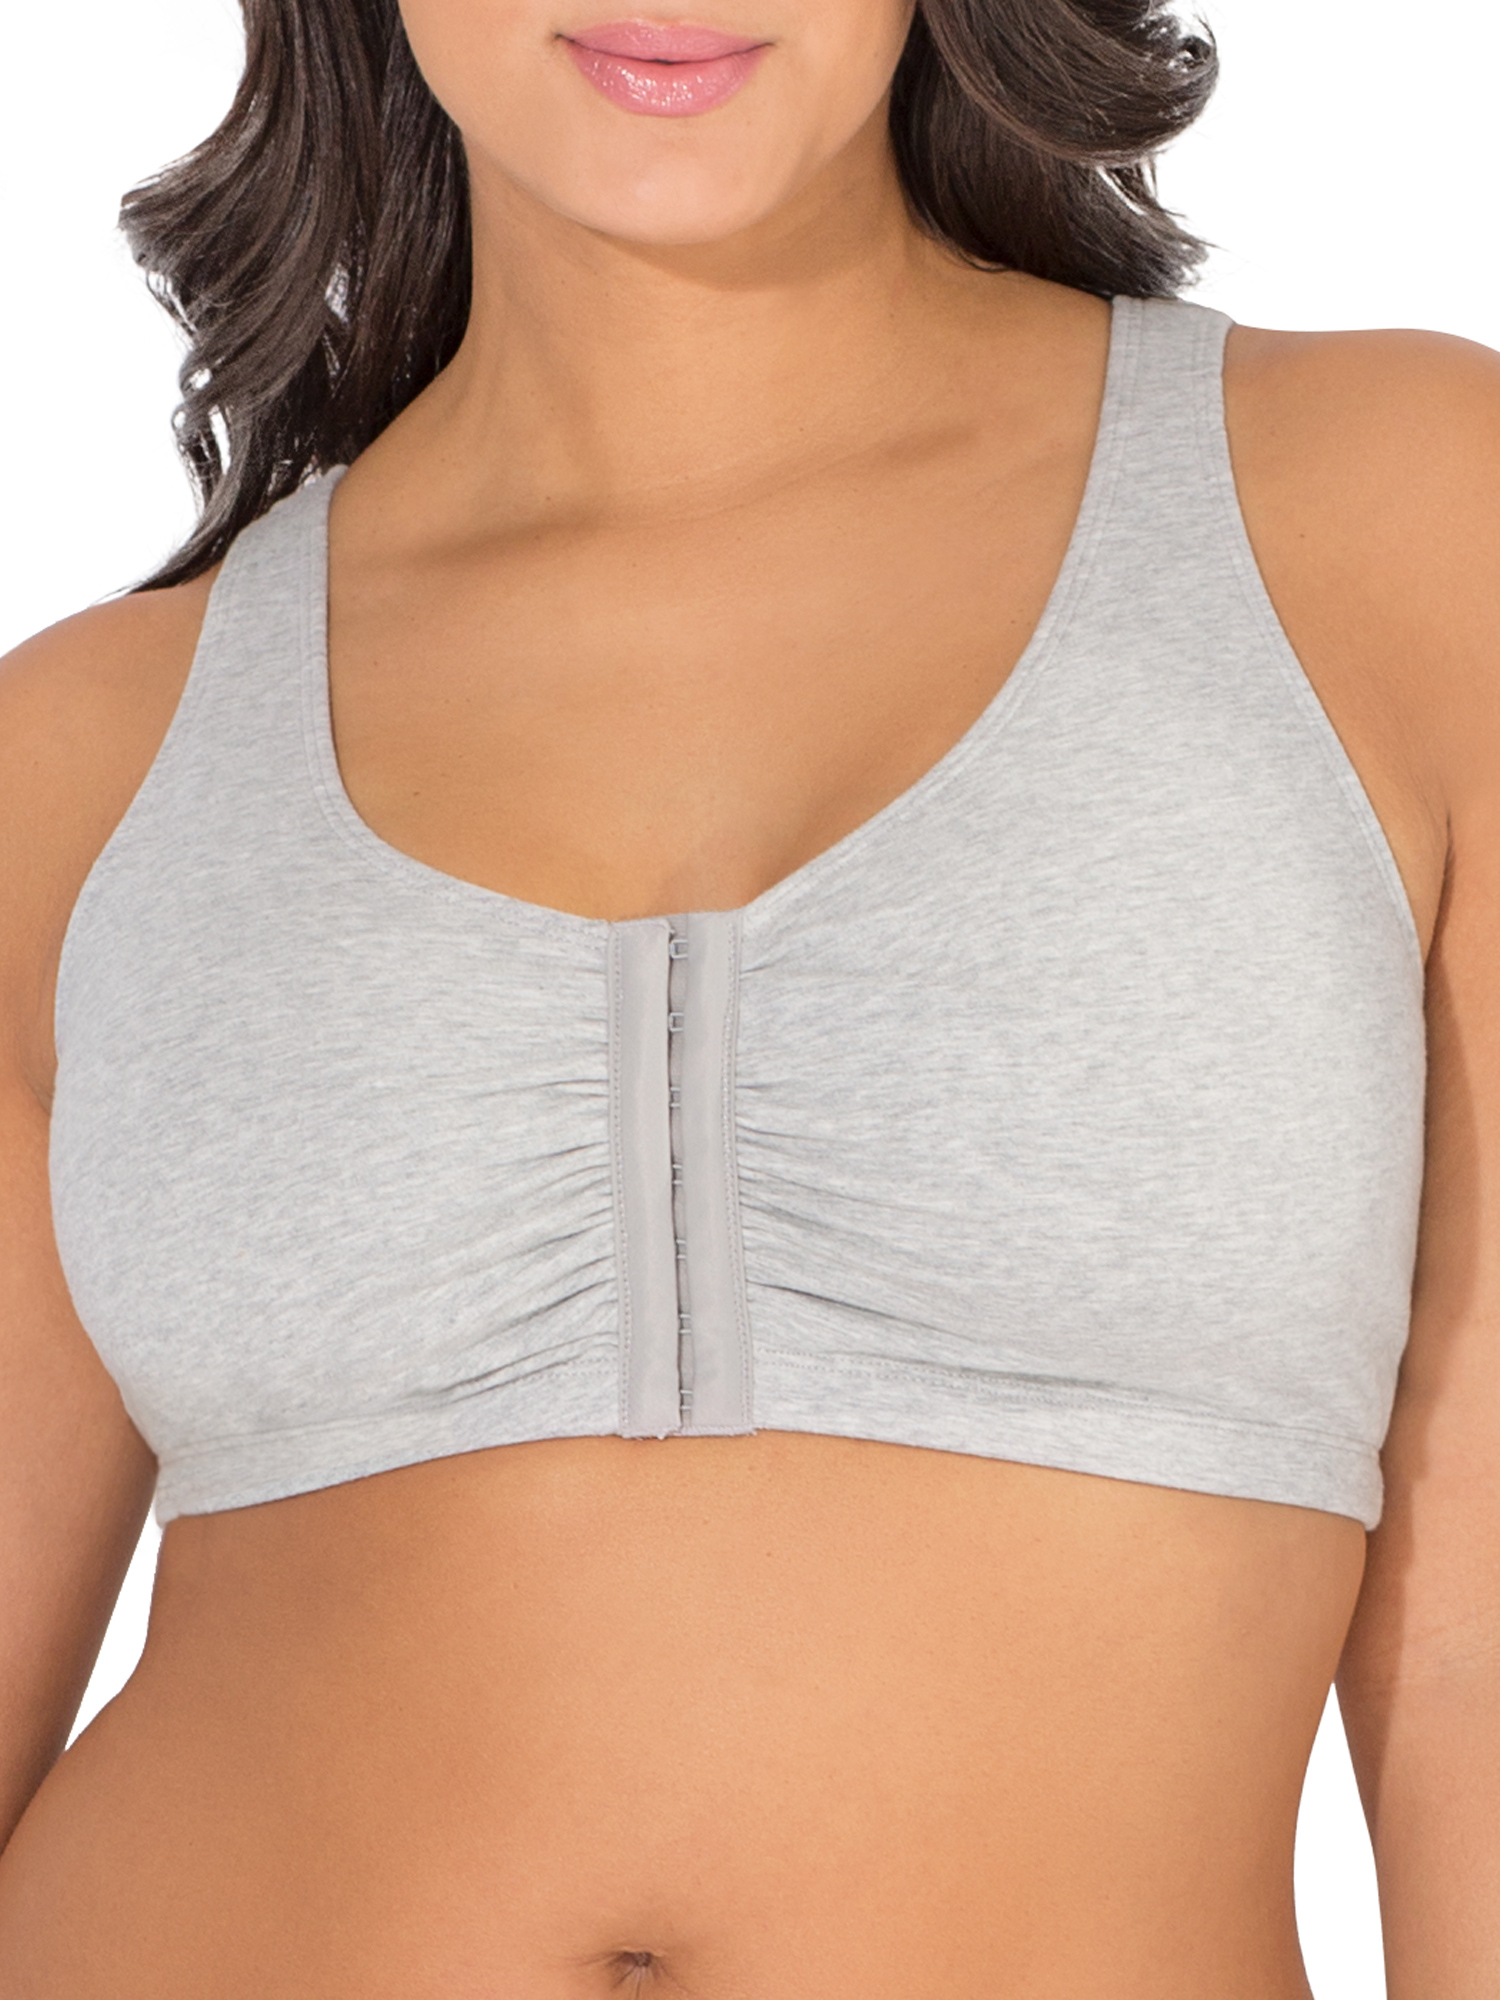 Fruit of The Loom Women's Comfort Front Close Cotton Sports Bra, 2 Pack - image 4 of 7